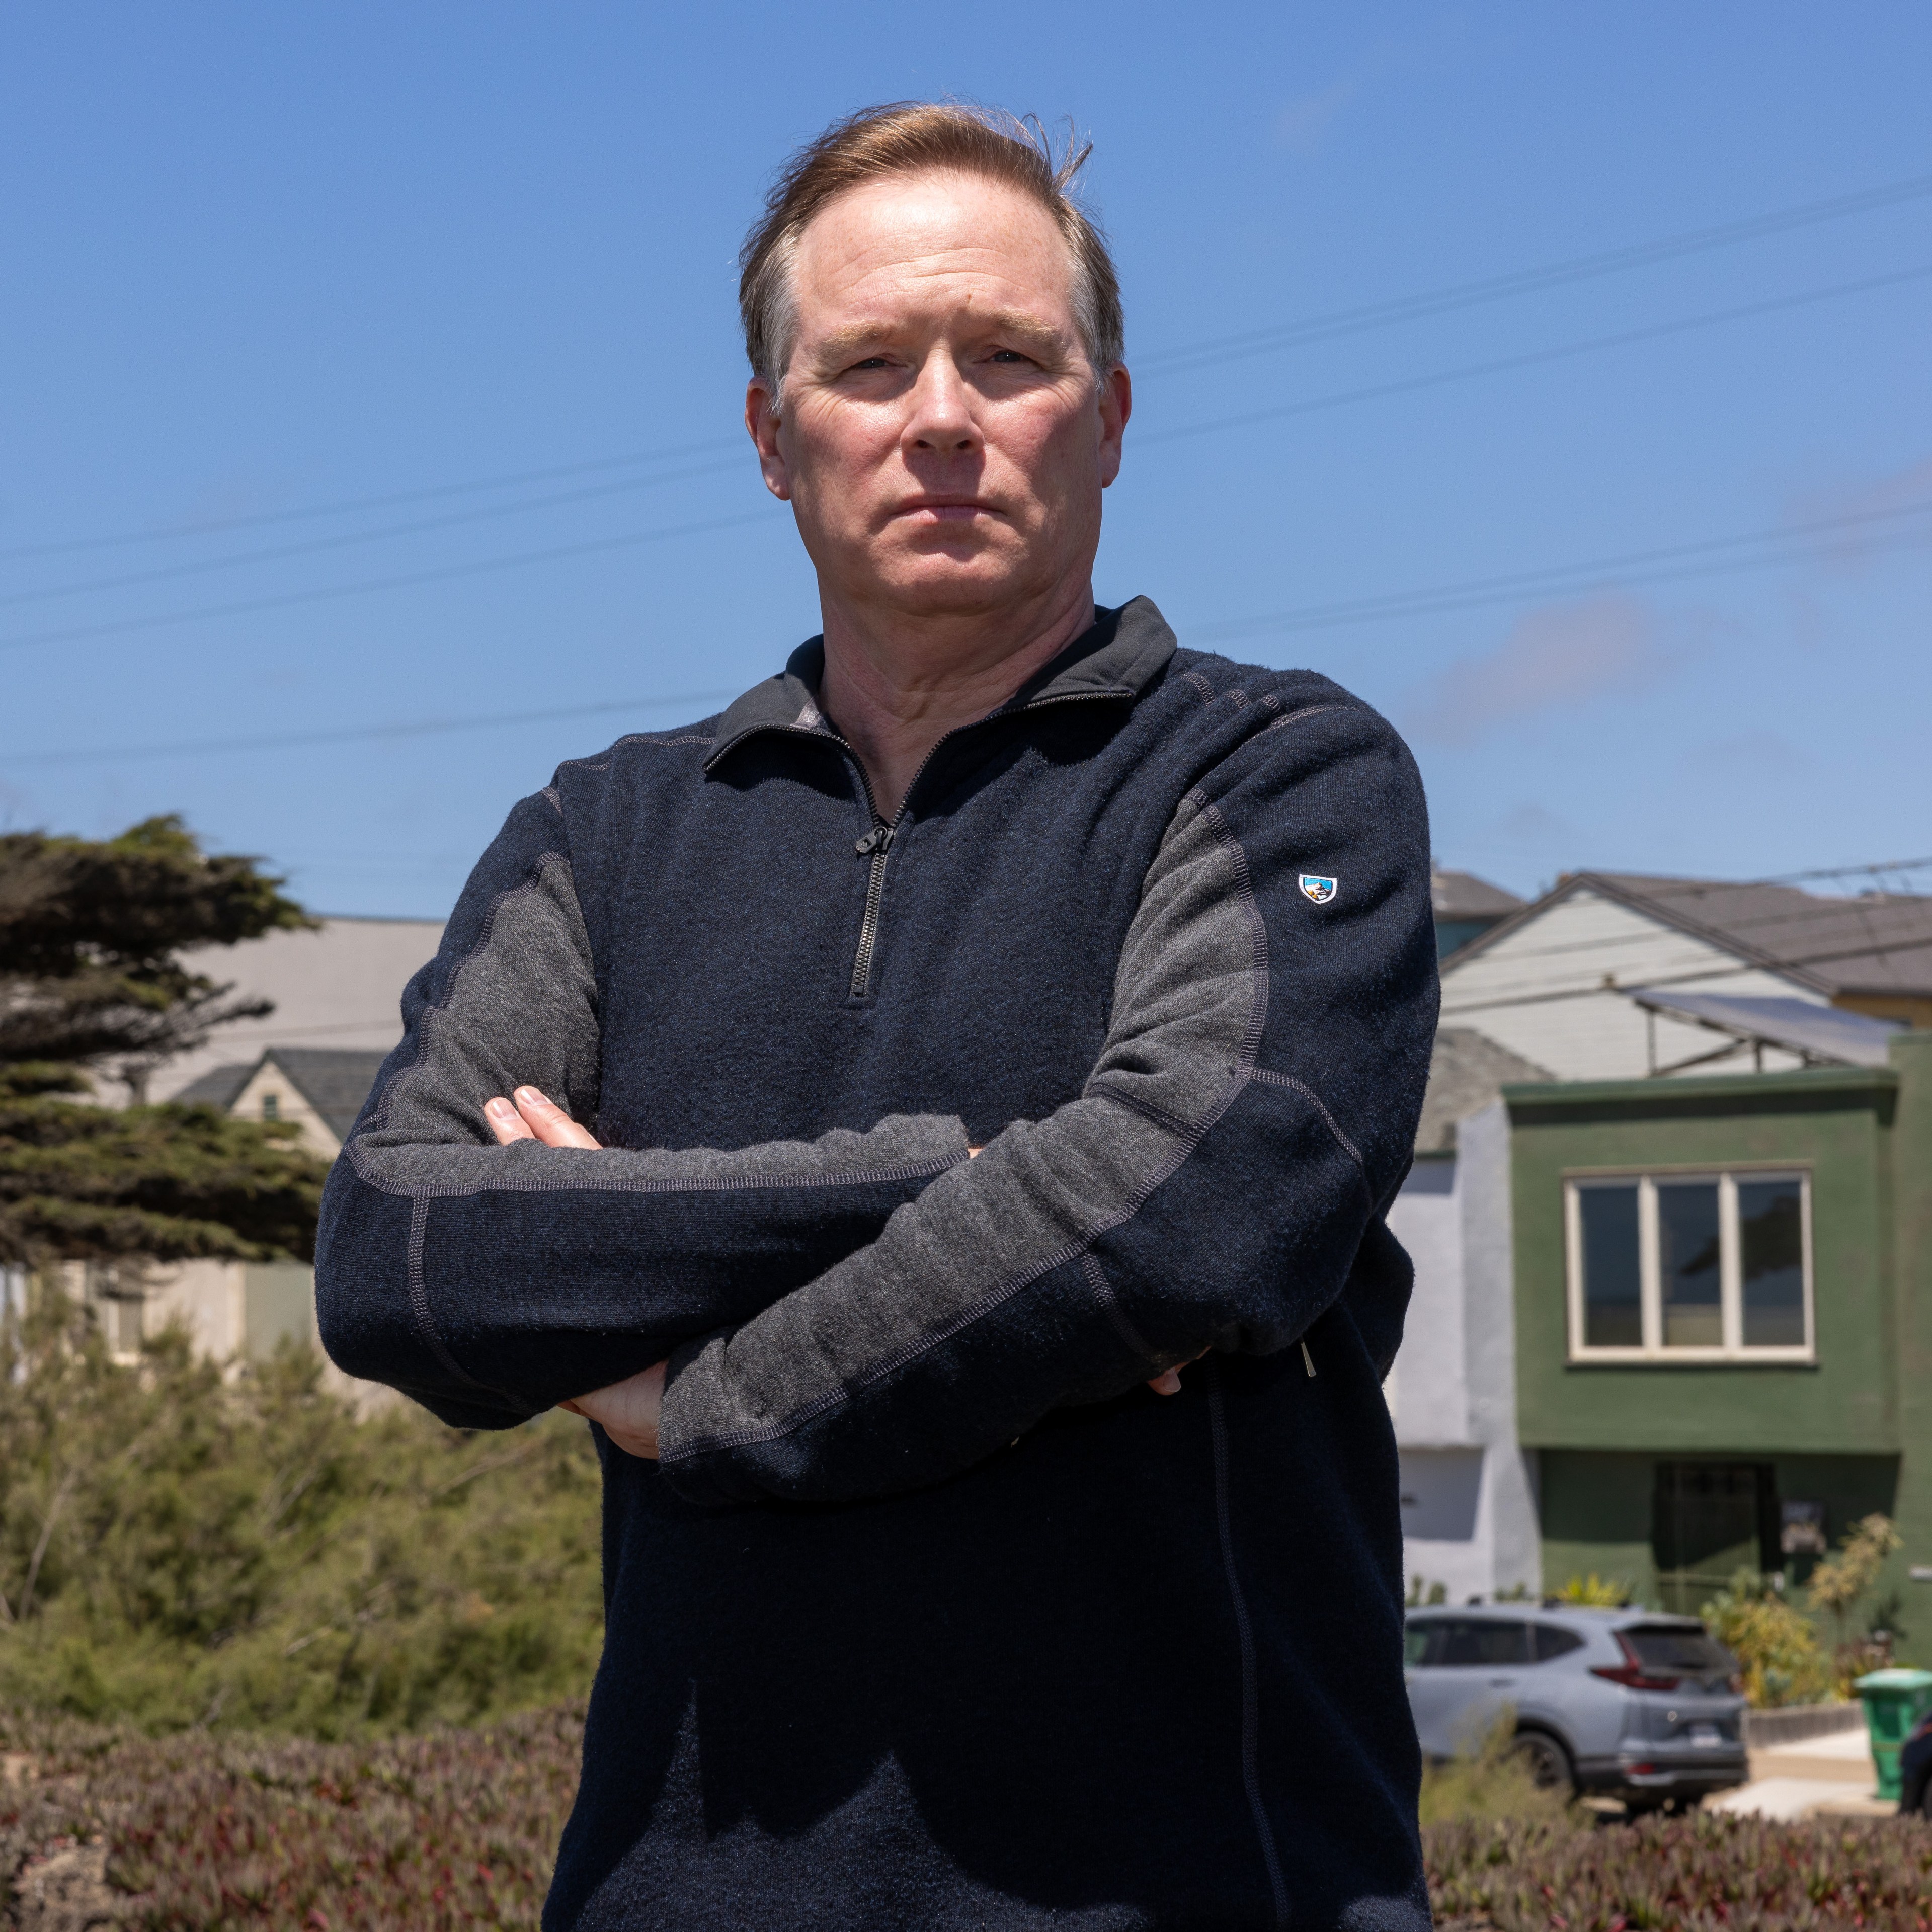 A man is standing with arms crossed, wearing a dark long-sleeve shirt. He's outside with a blue sky, houses, and greenery in the background. His expression is serious.